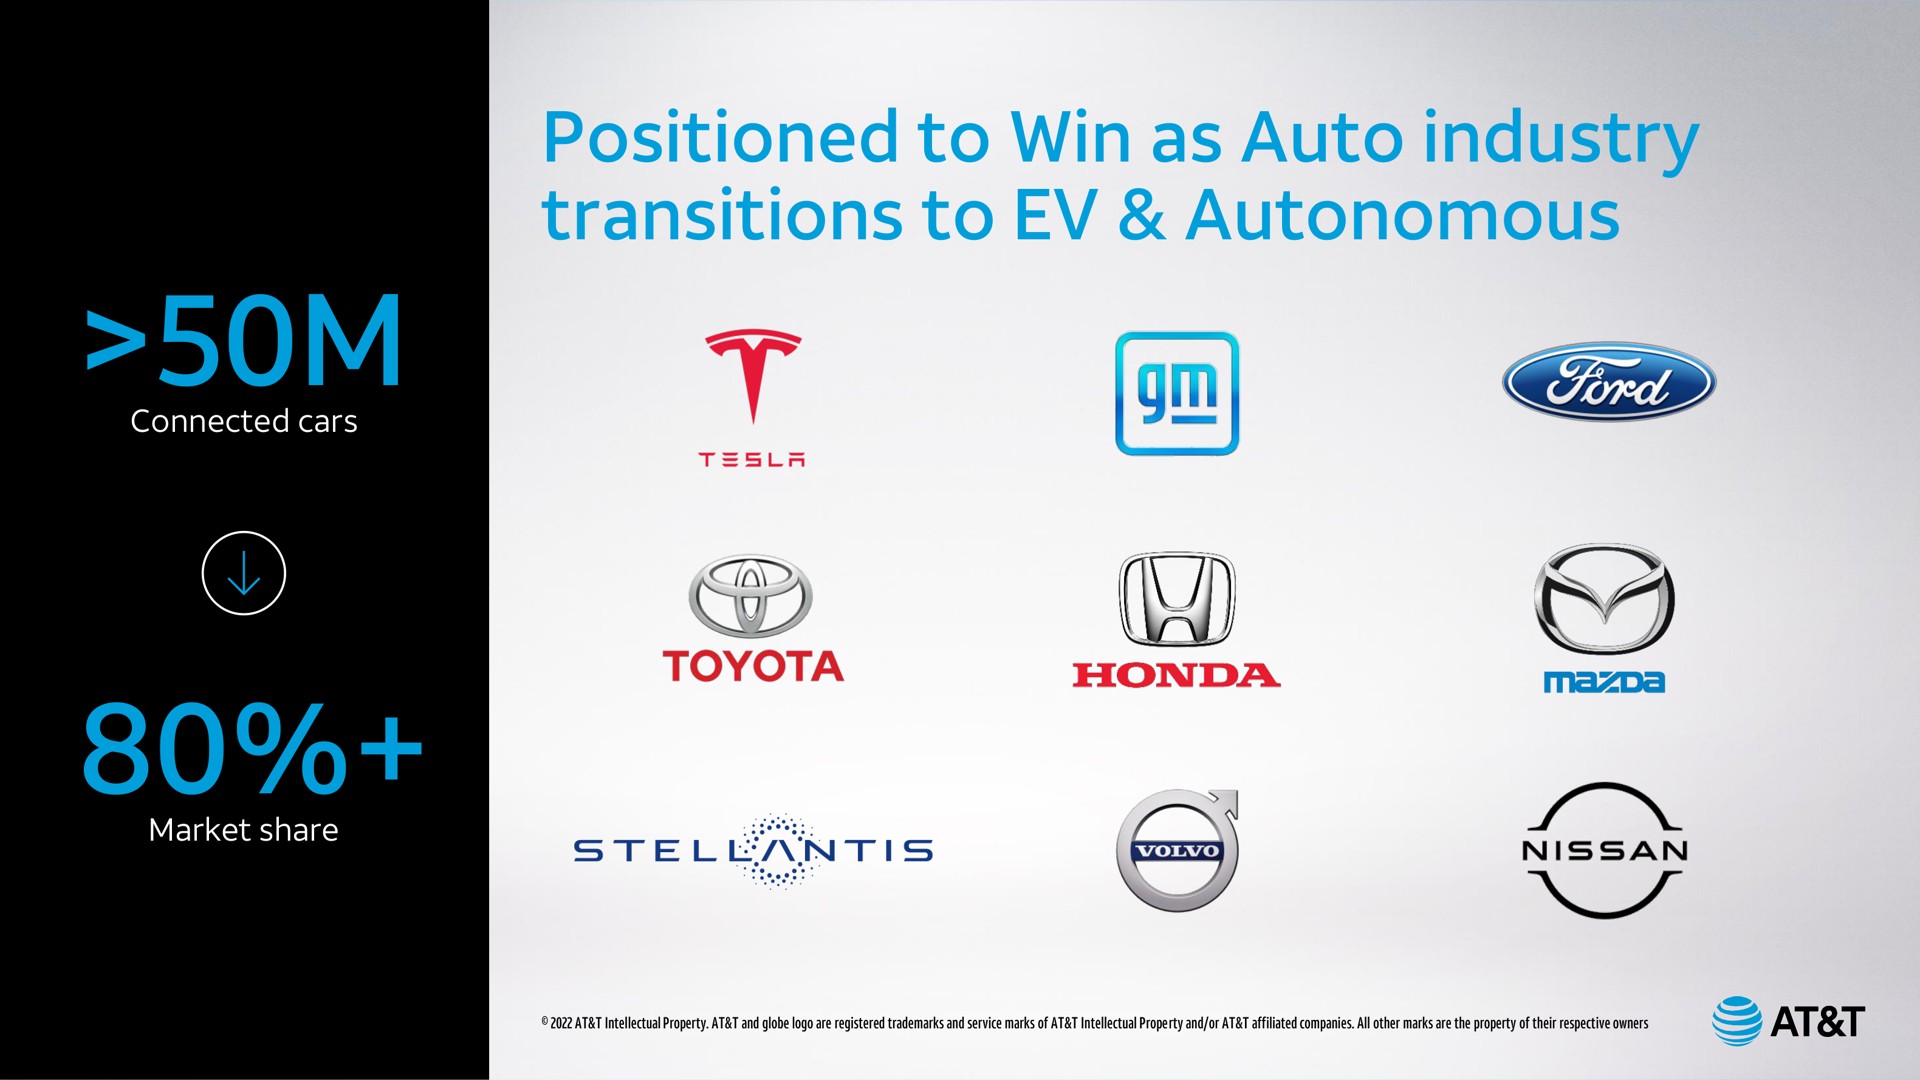 positioned to win as auto industry transitions to autonomous up | AT&T